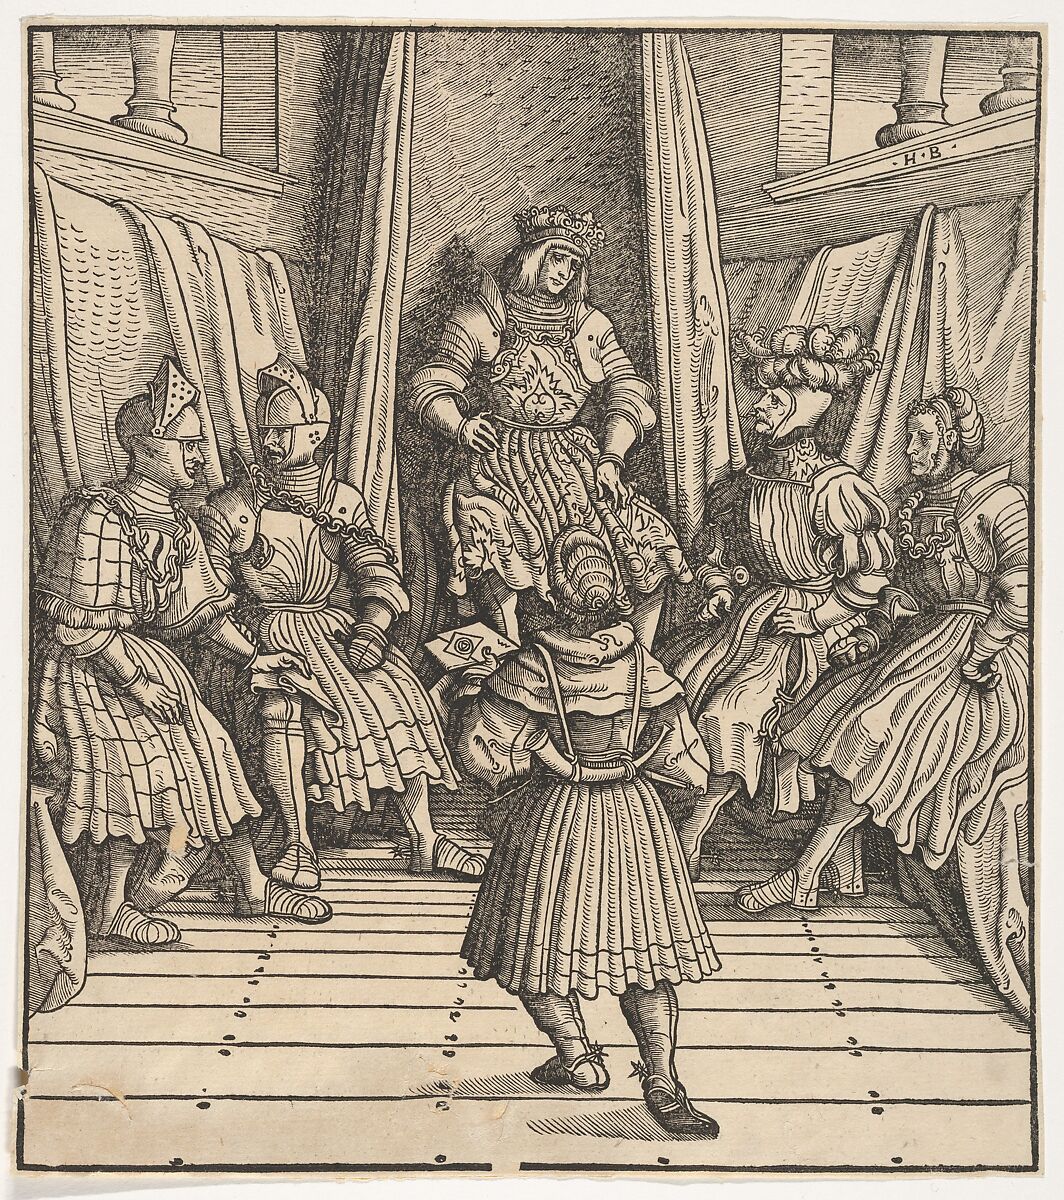 The White King in a Council with the Welsh Party, Receiving a Message, from "Der Weisskunig", Hans Burgkmair (German, Augsburg 1473–1531 Augsburg), Woodcut 